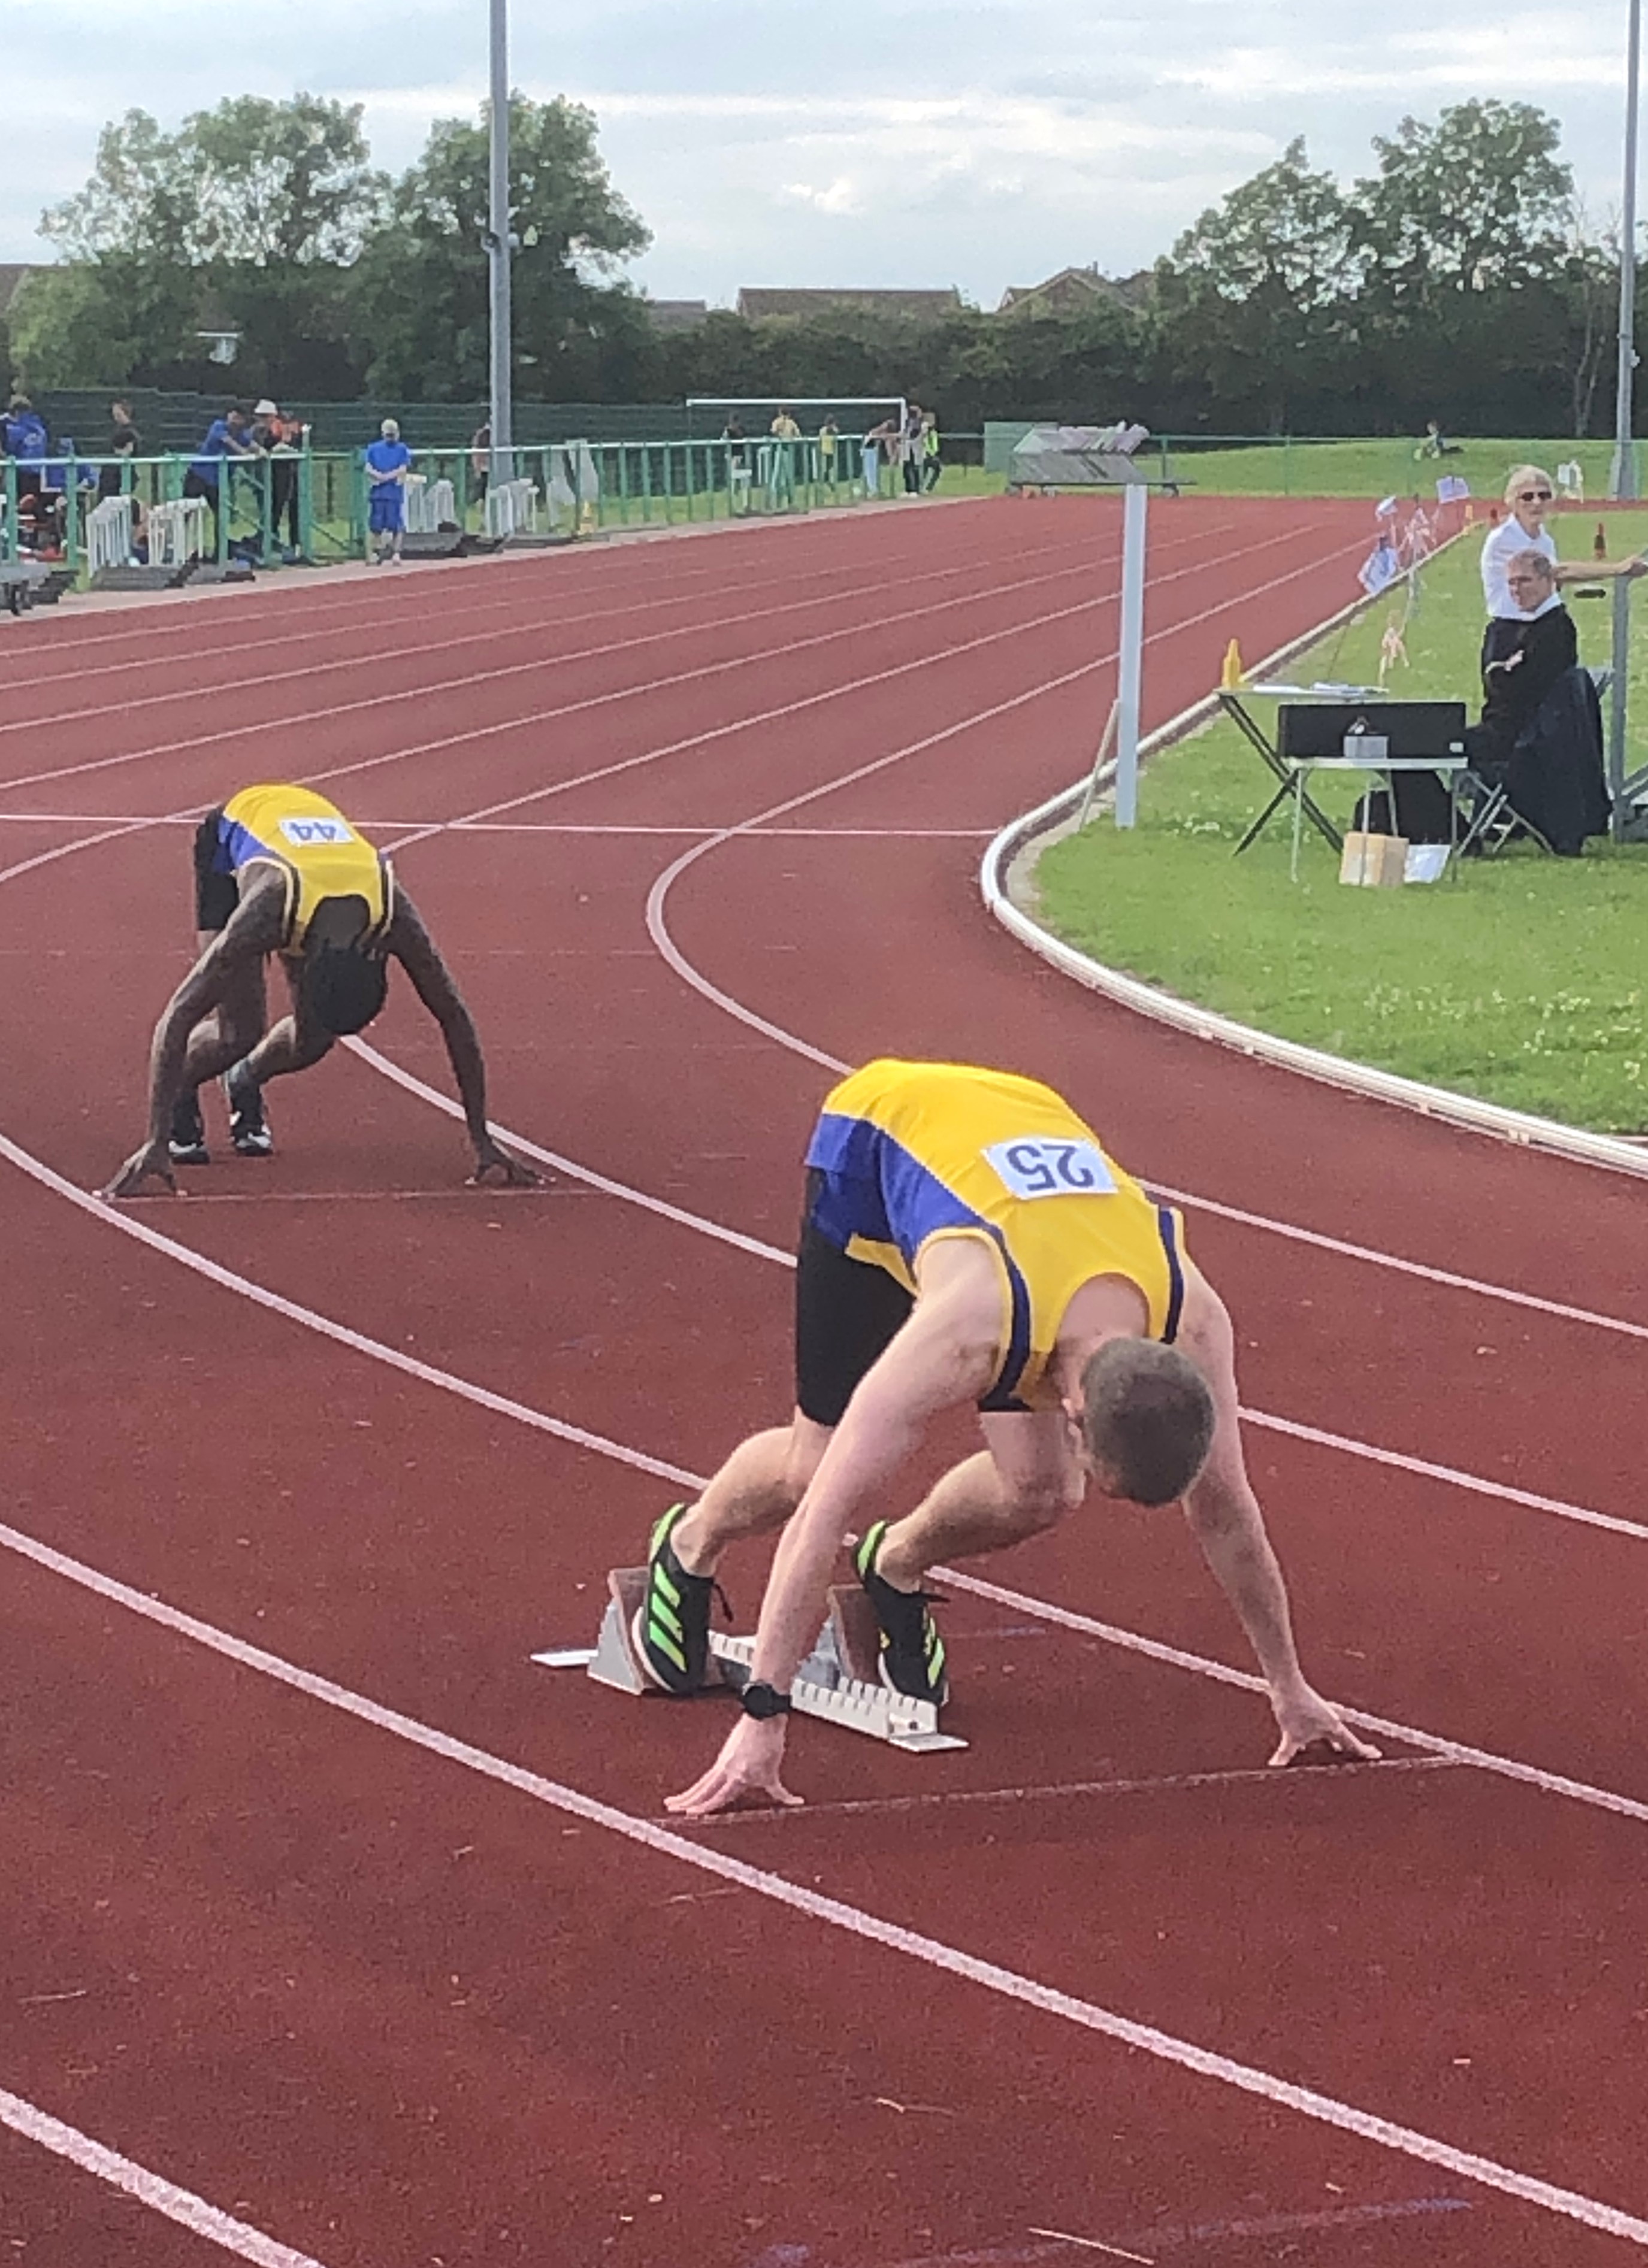 New club record and many PBs at Biggleswade AC Track Fest